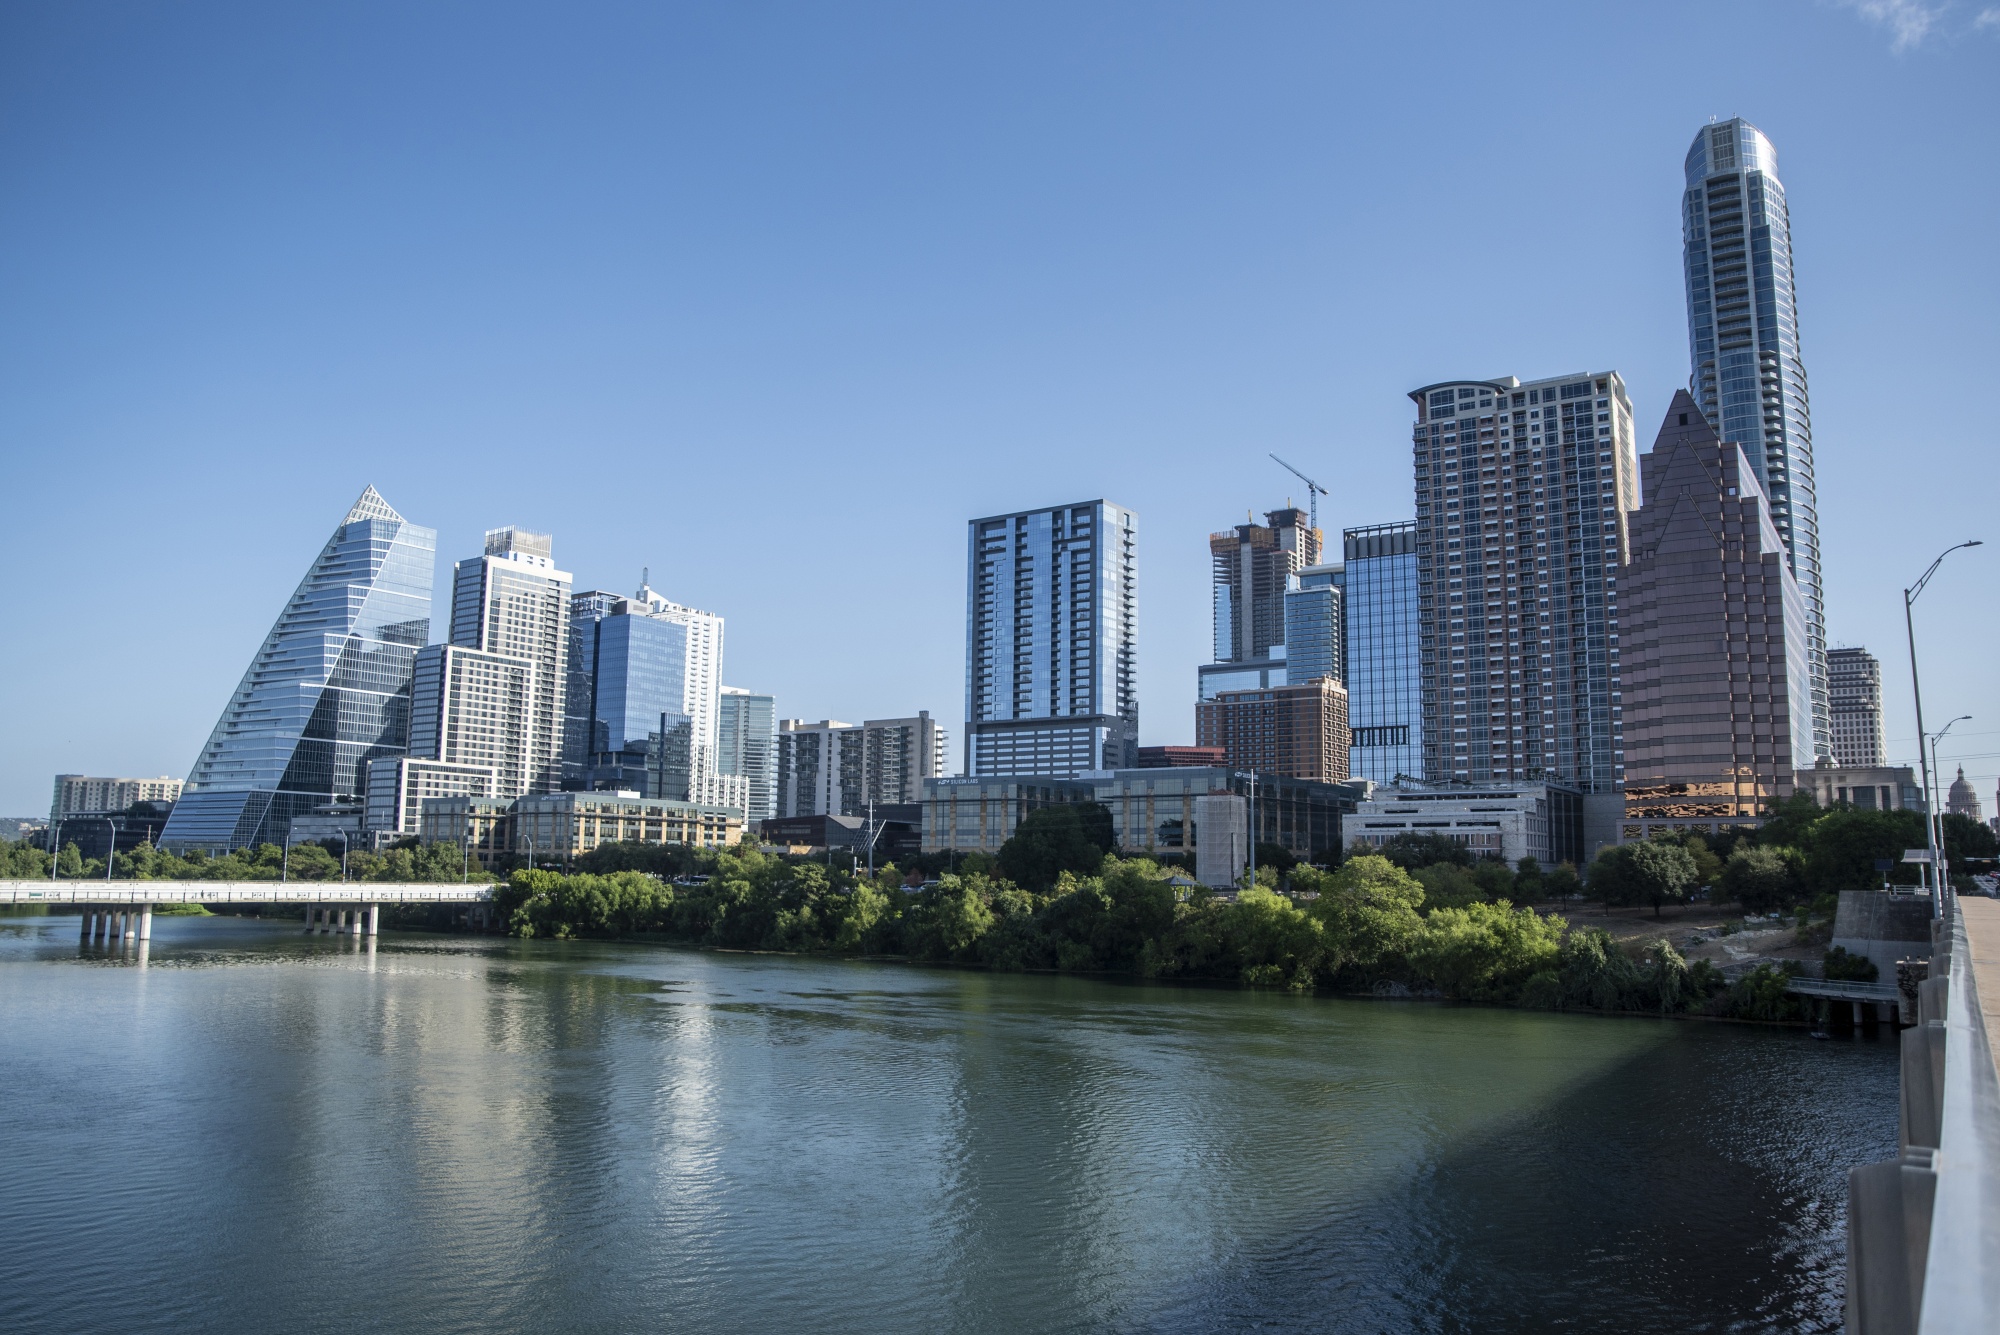 High Income New Yorkers Save $250,000 By Moving to Austin, Texas - Bloomberg